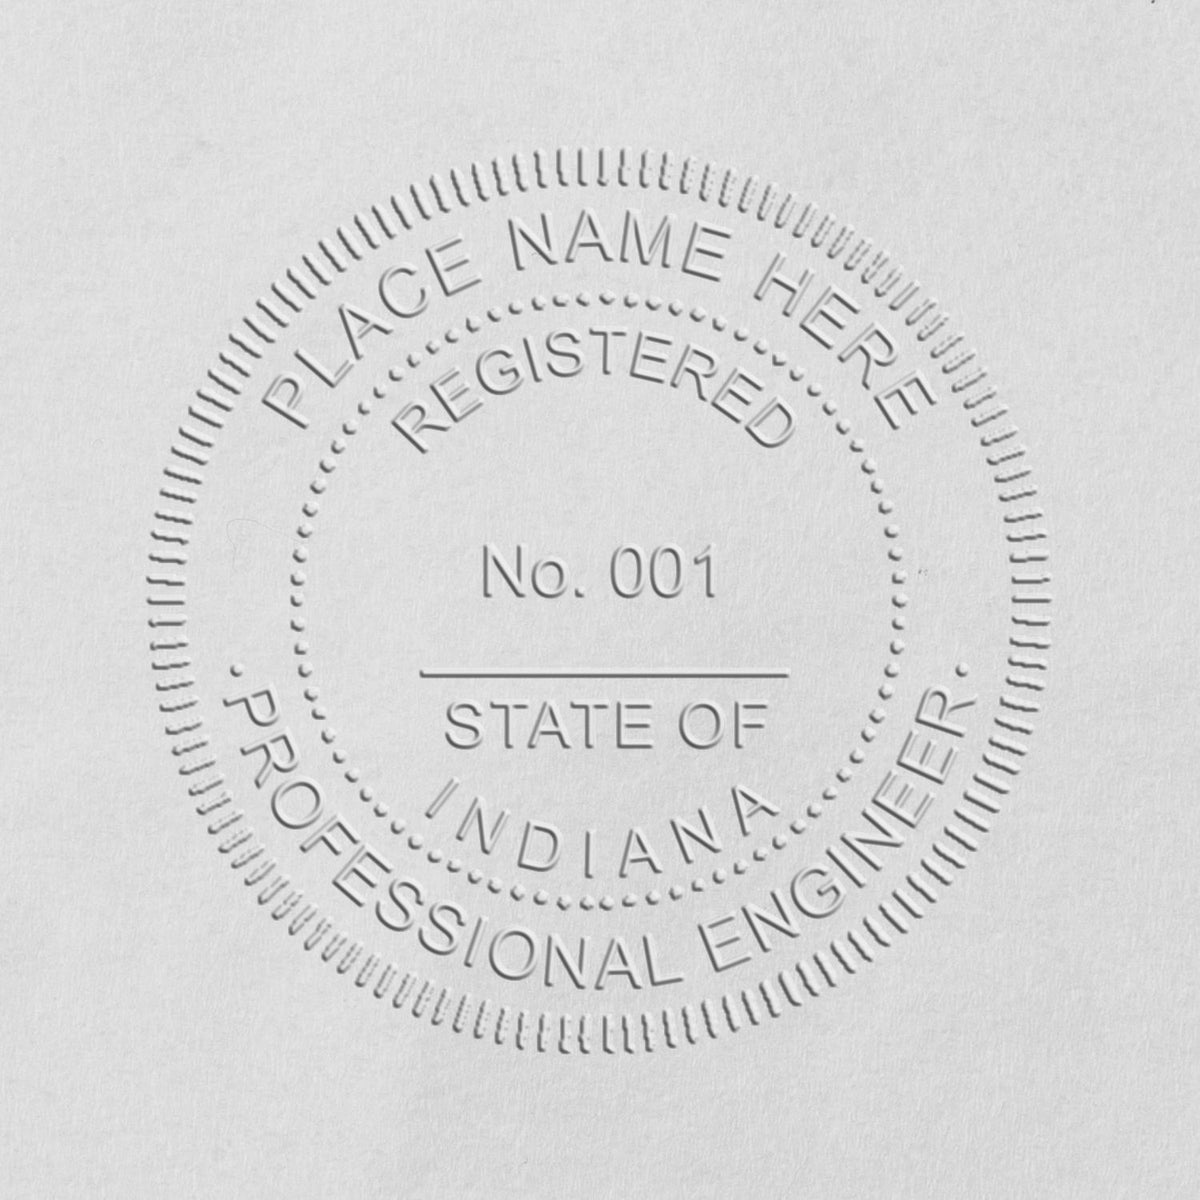 A photograph of the Hybrid Indiana Engineer Seal stamp impression reveals a vivid, professional image of the on paper.